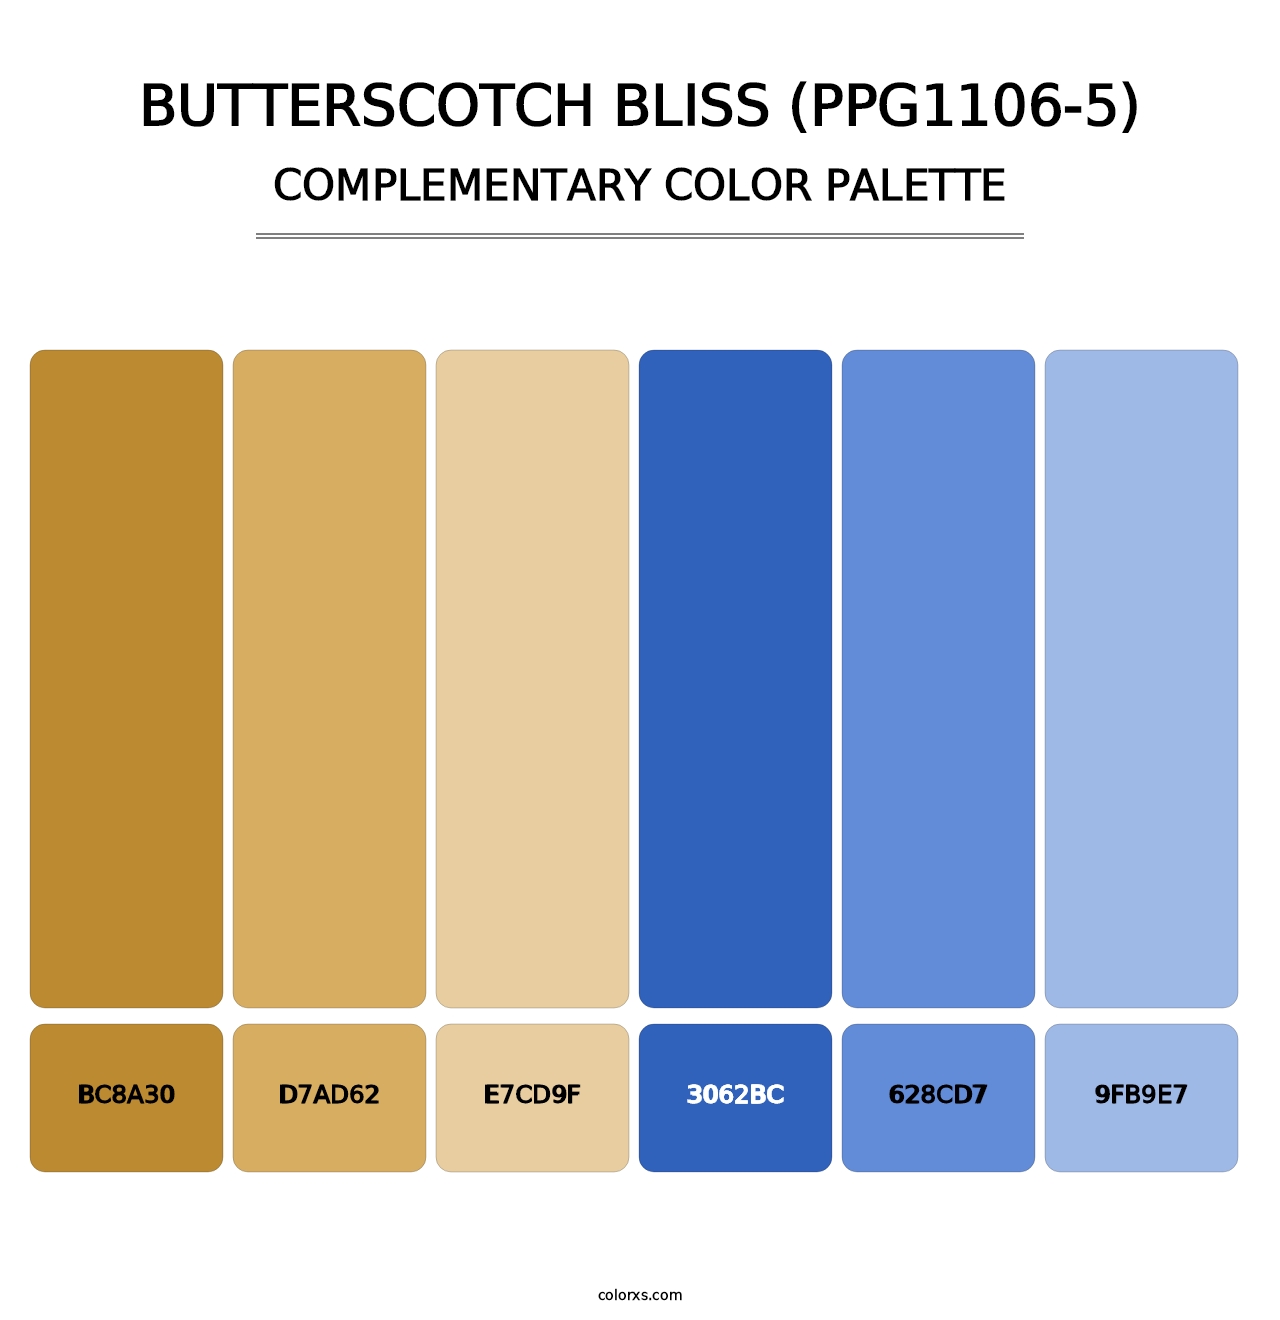 Butterscotch Bliss (PPG1106-5) - Complementary Color Palette